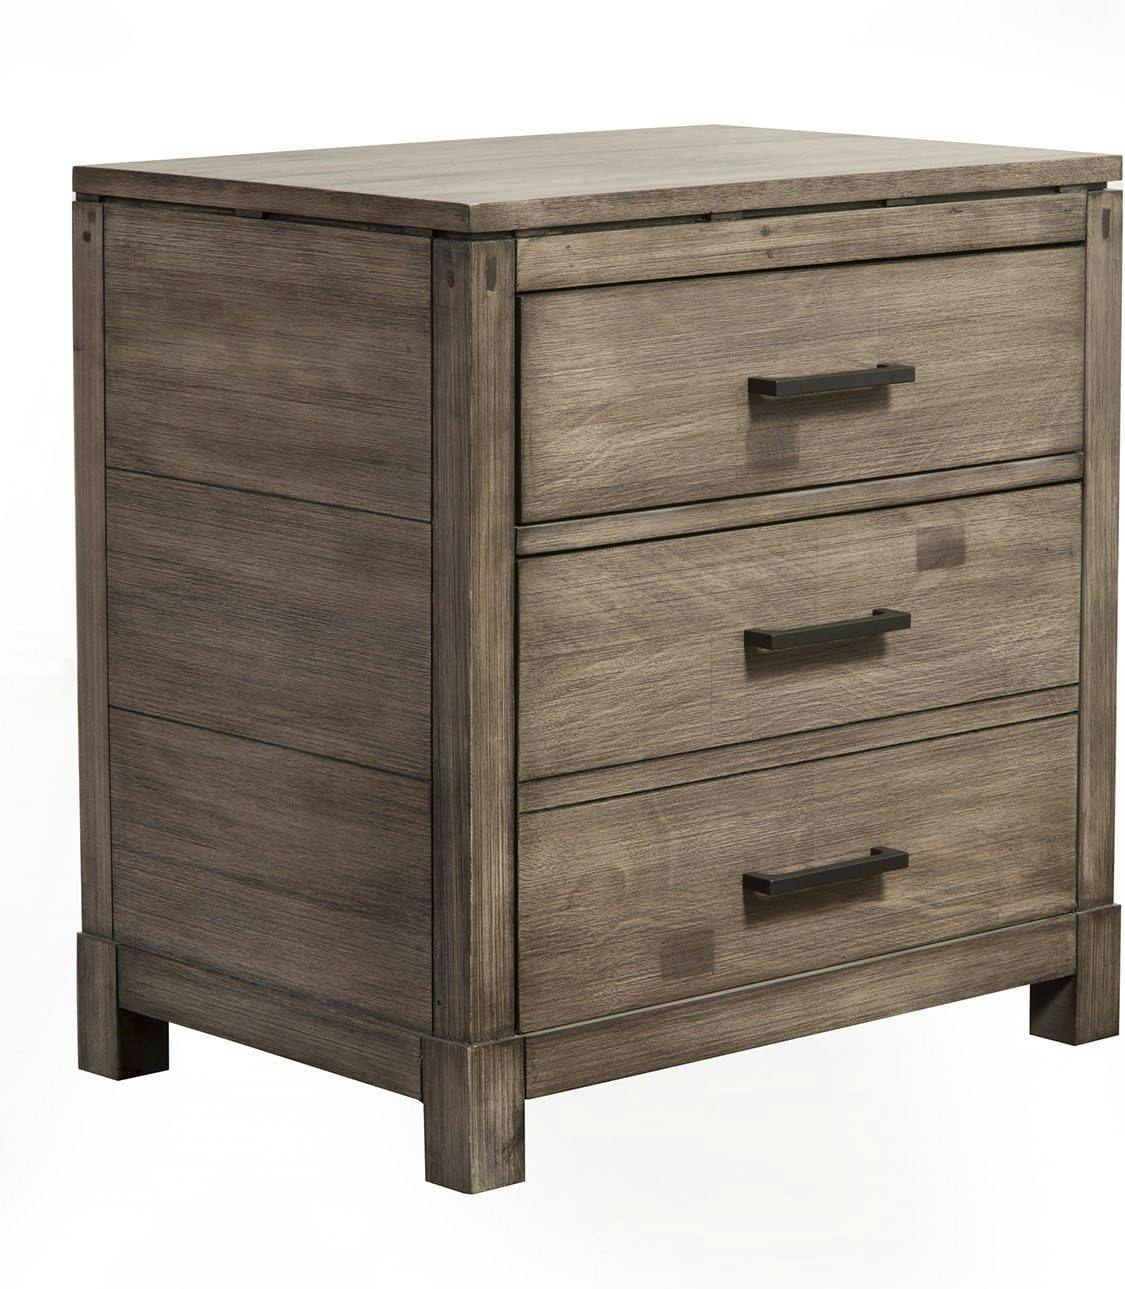 Sydney Transitional 2-Drawer Nightstand in Gray/Brown Mahogany